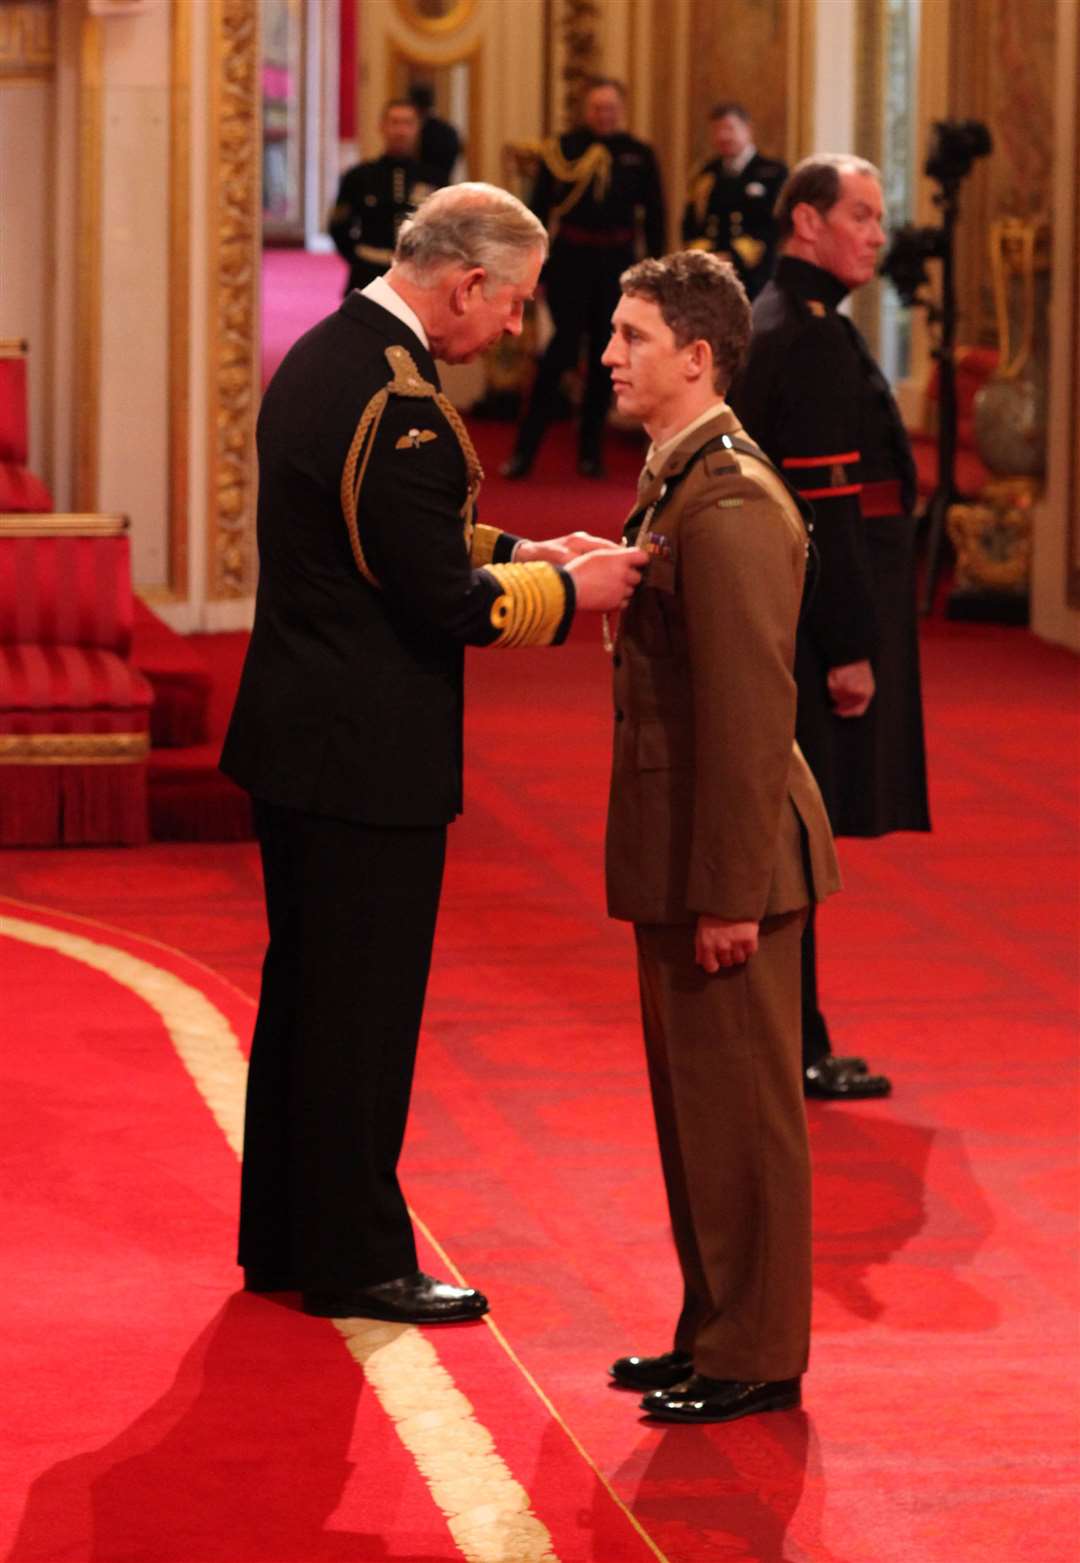 Mr Cutterham was presented with the Conspicuous Gallantry Cross by Prince Charles during an investiture ceremony at Buckingham Palace in 2012 (Lewis Whyld/PA)